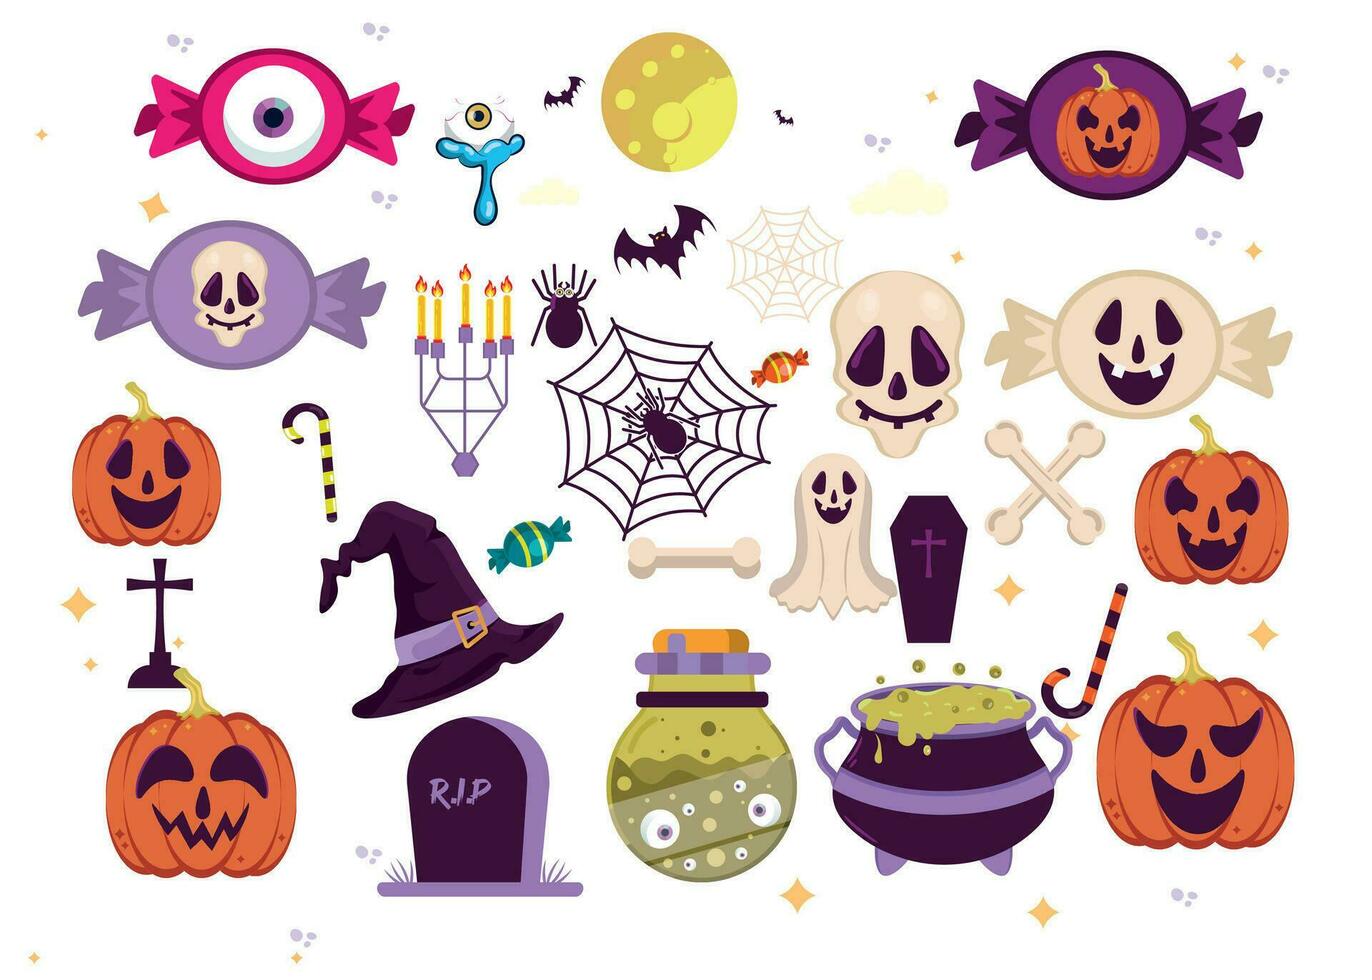 Happy Halloween set of elements hat, ghost, bat, candy, funny pumpkins, witch's cauldron, spider. Perfect for scrapbooking, greeting card, party invitation, poster, tag, stickers. Hand drawn vectors